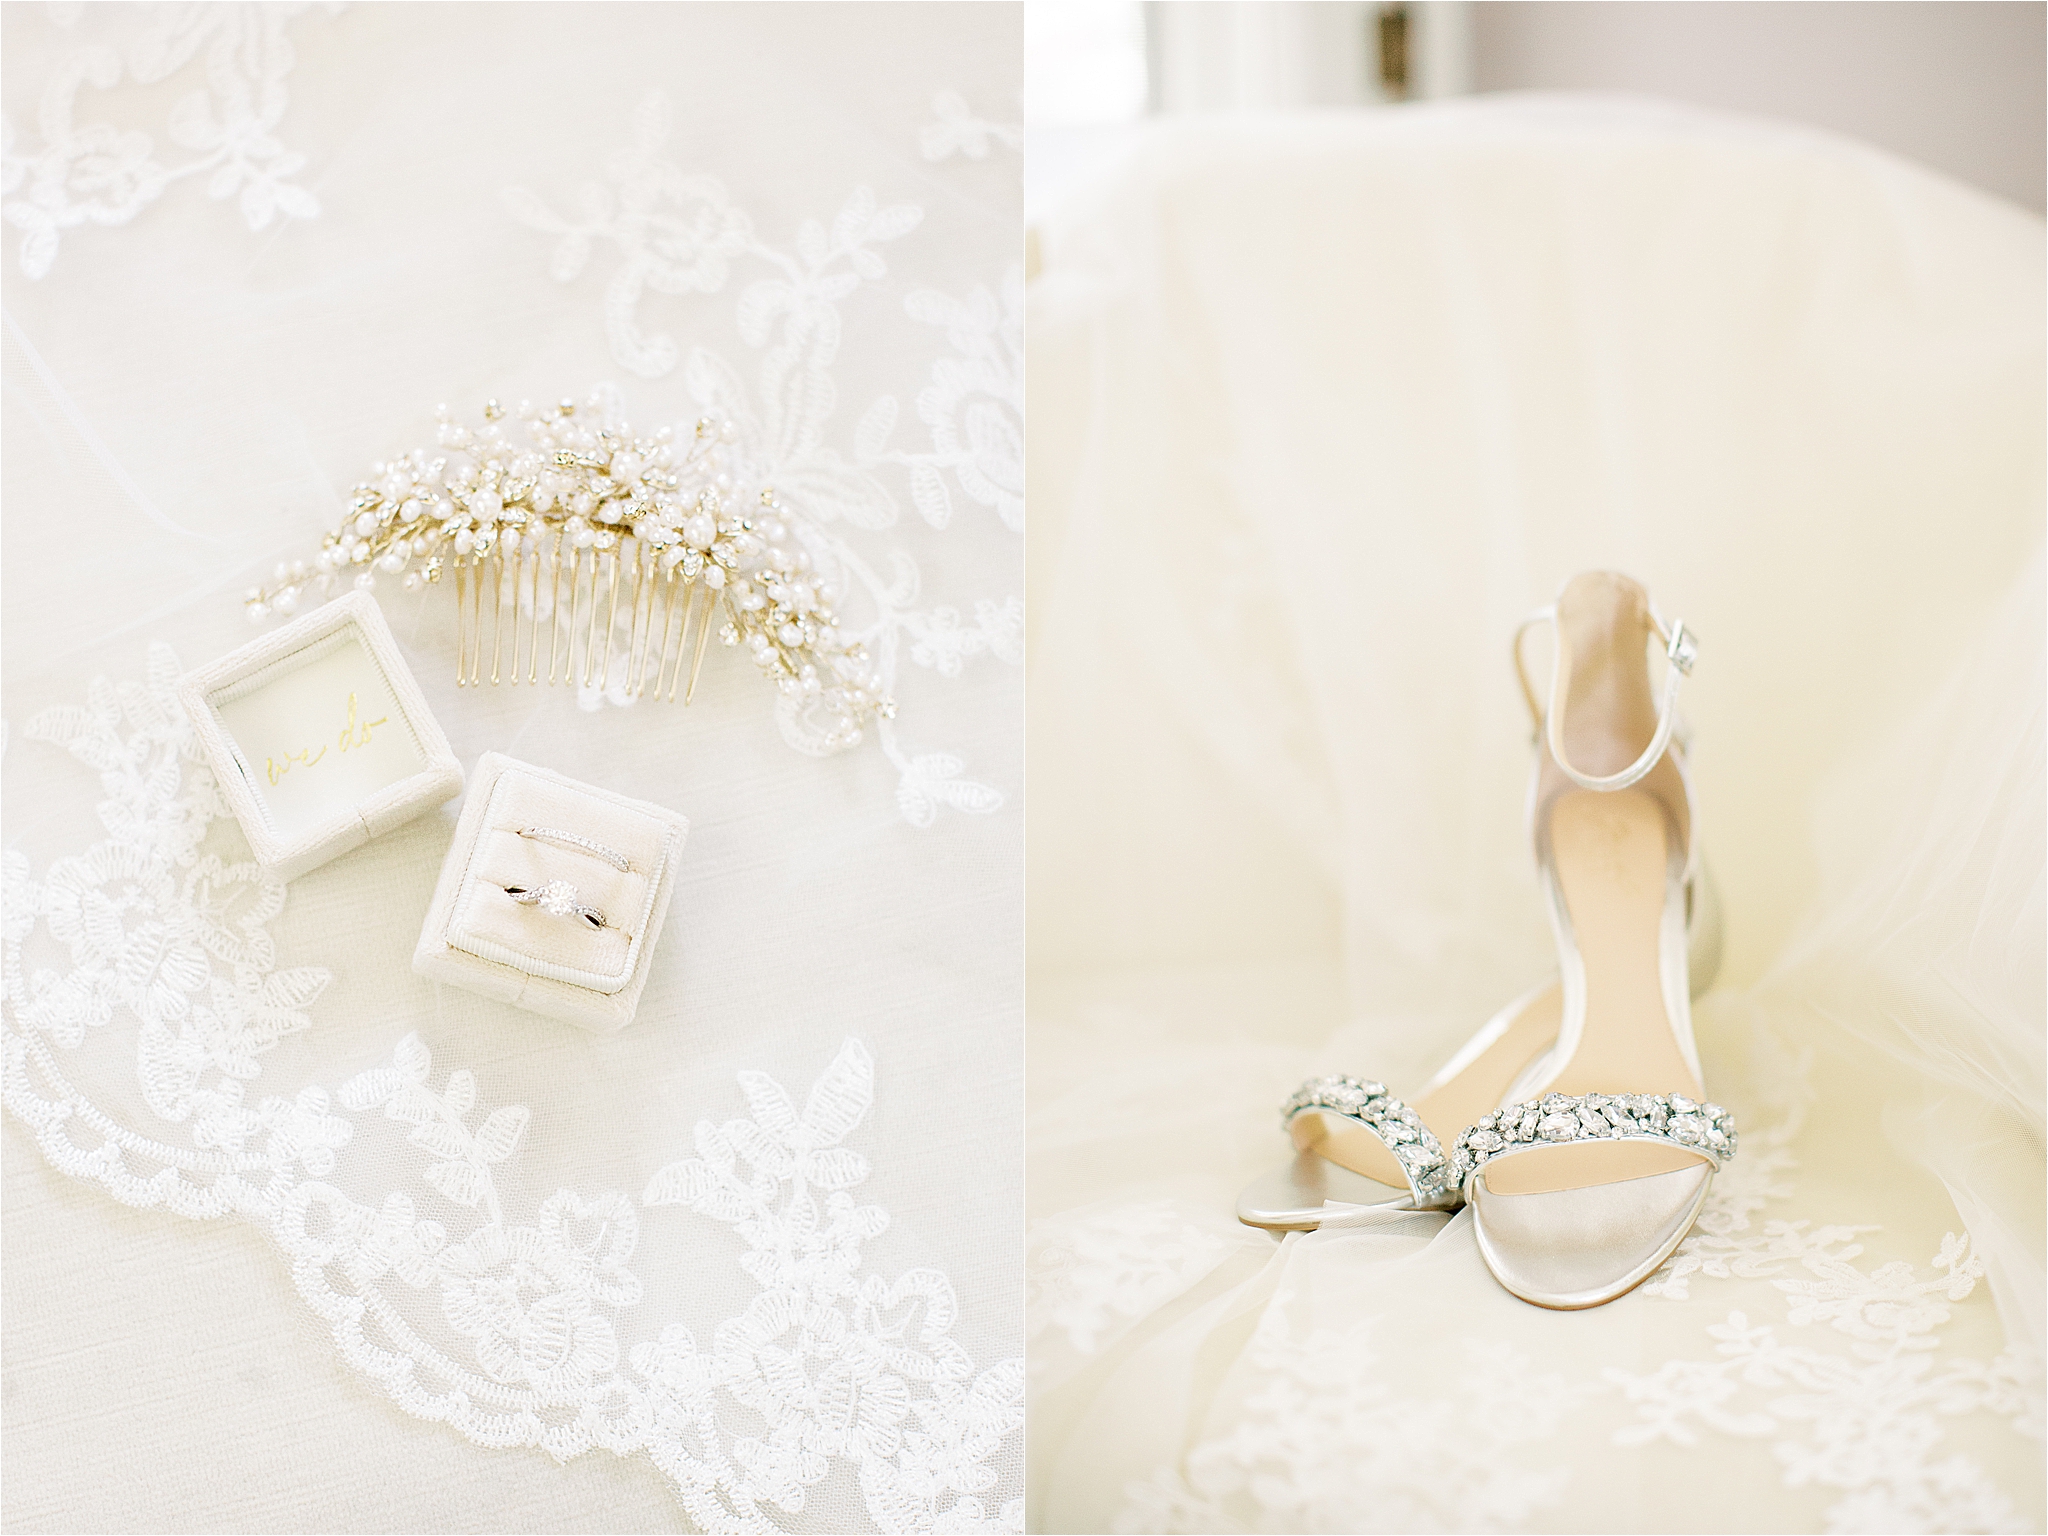 Badgely Mishka wedding shoes and wedding accessories